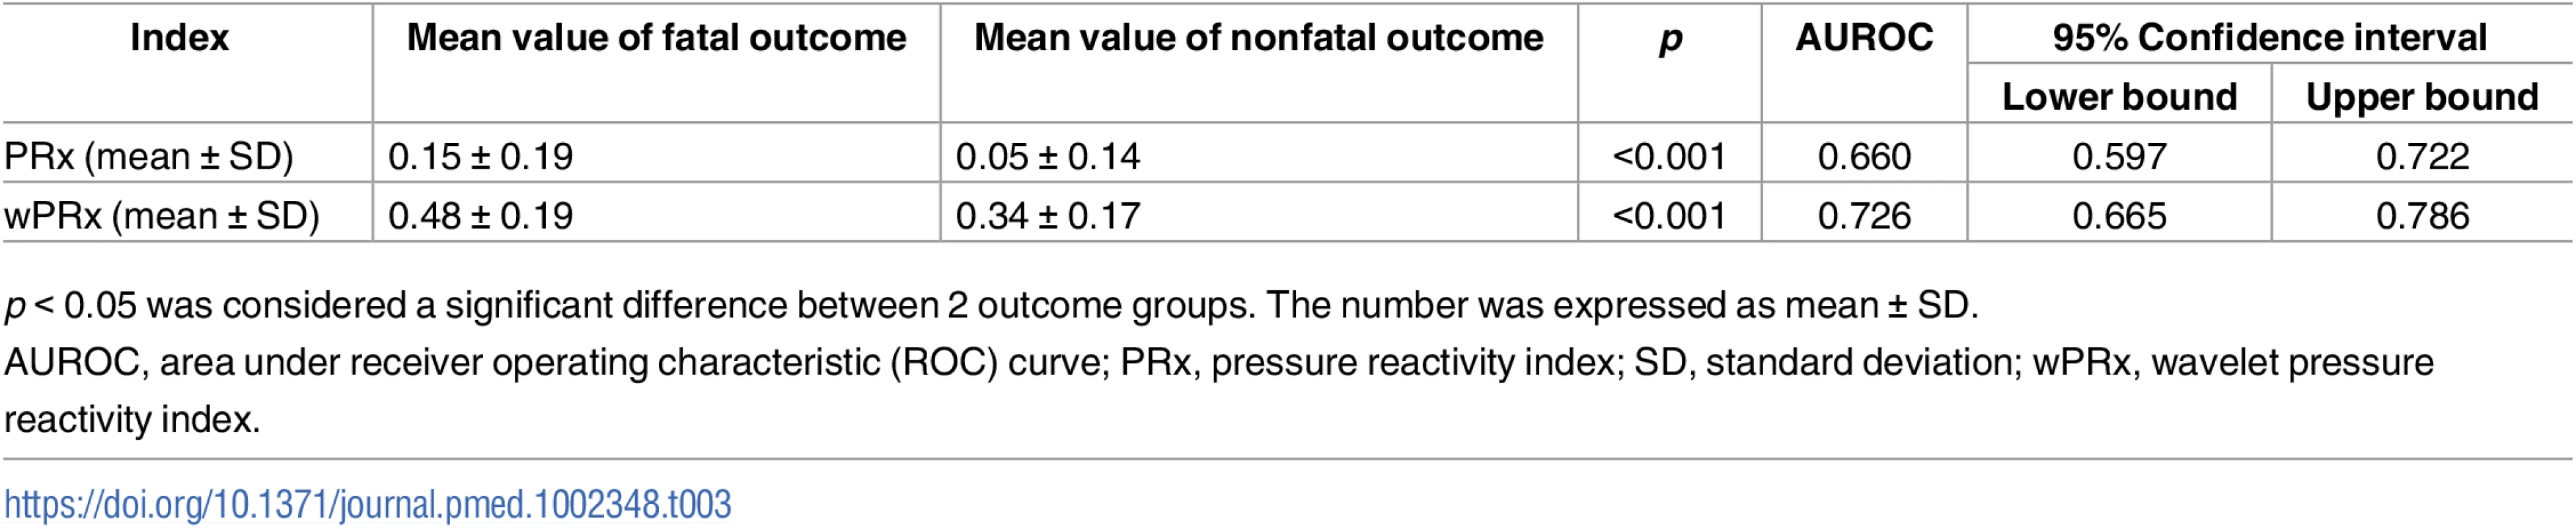 The ability of PRx/wPRx in distinguishing fatal and nonfatal outcomes.